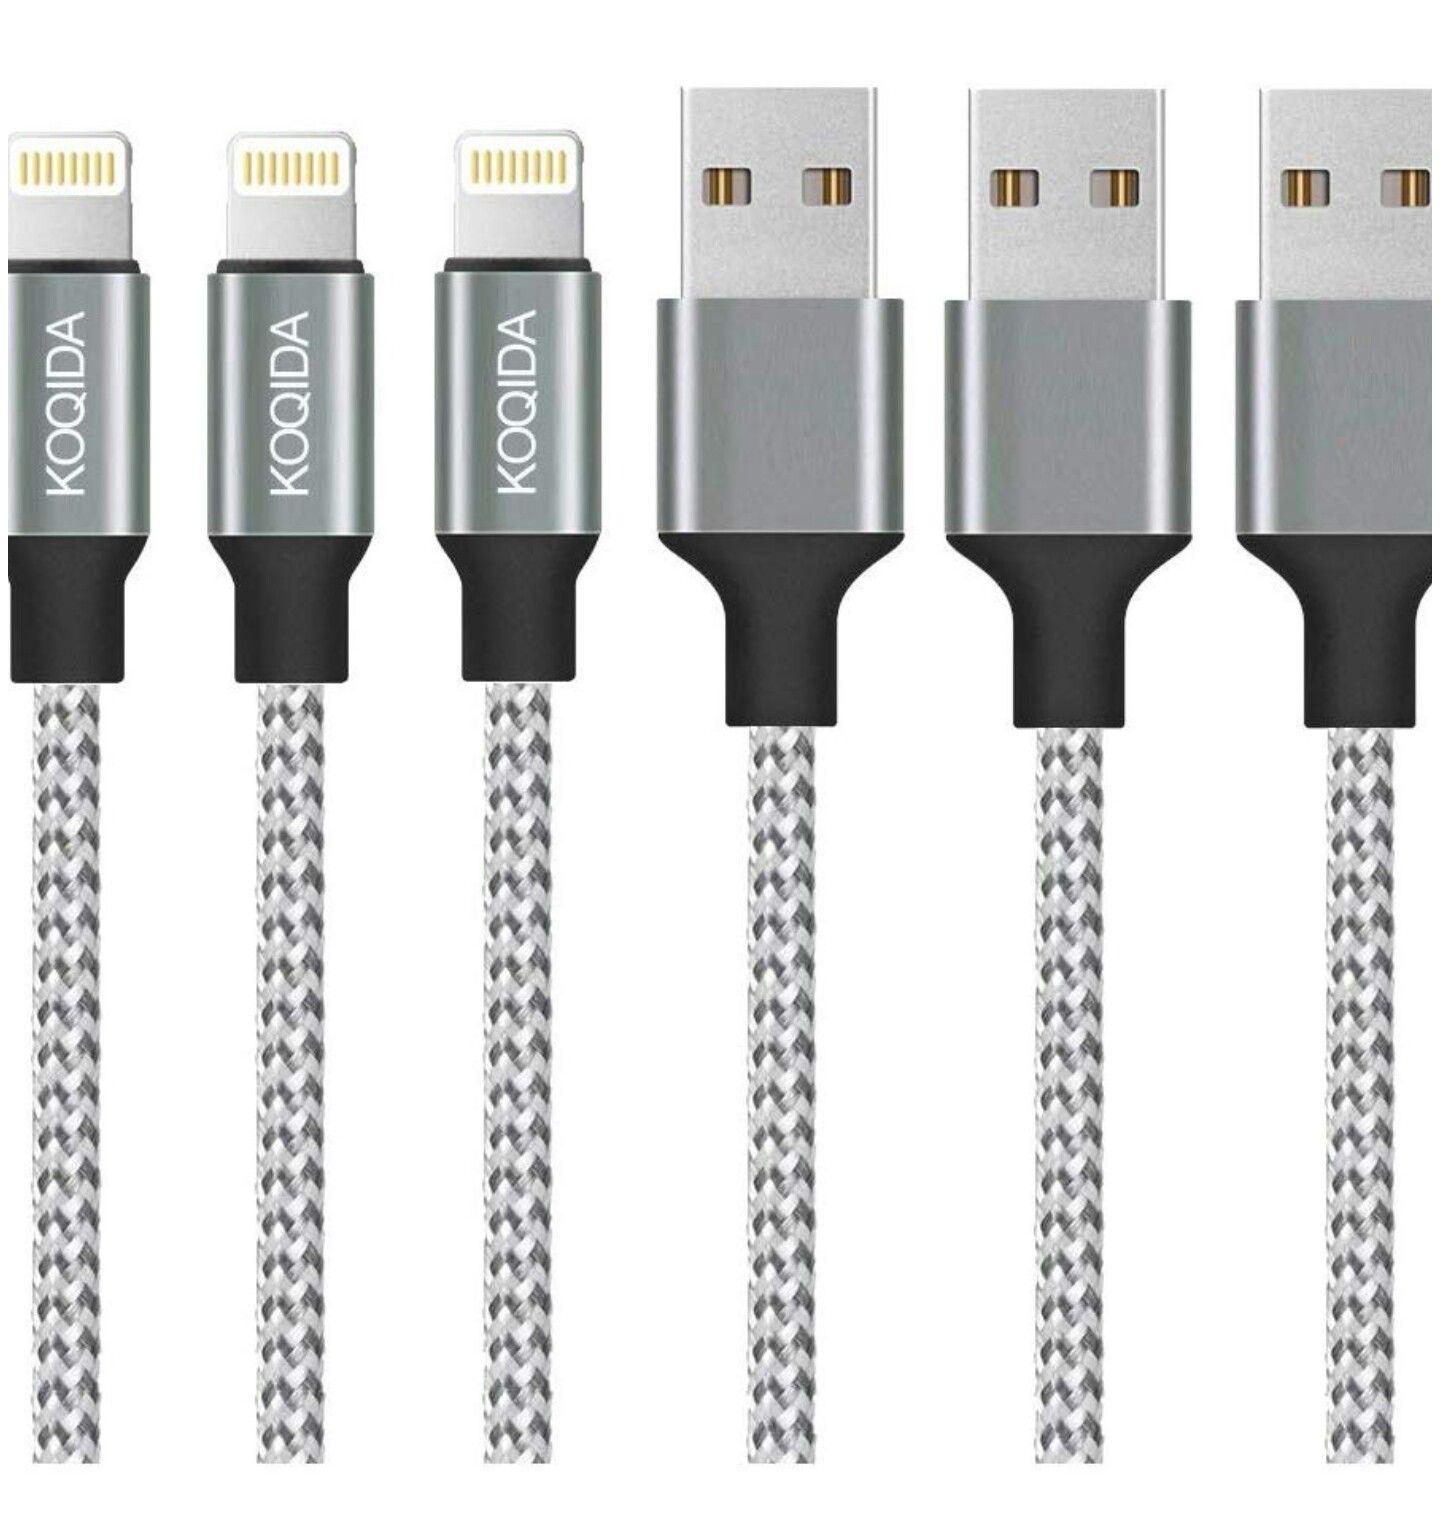 Lightning Cable,iPhone Charger 3PACK(6FT) Extra Long Nylon